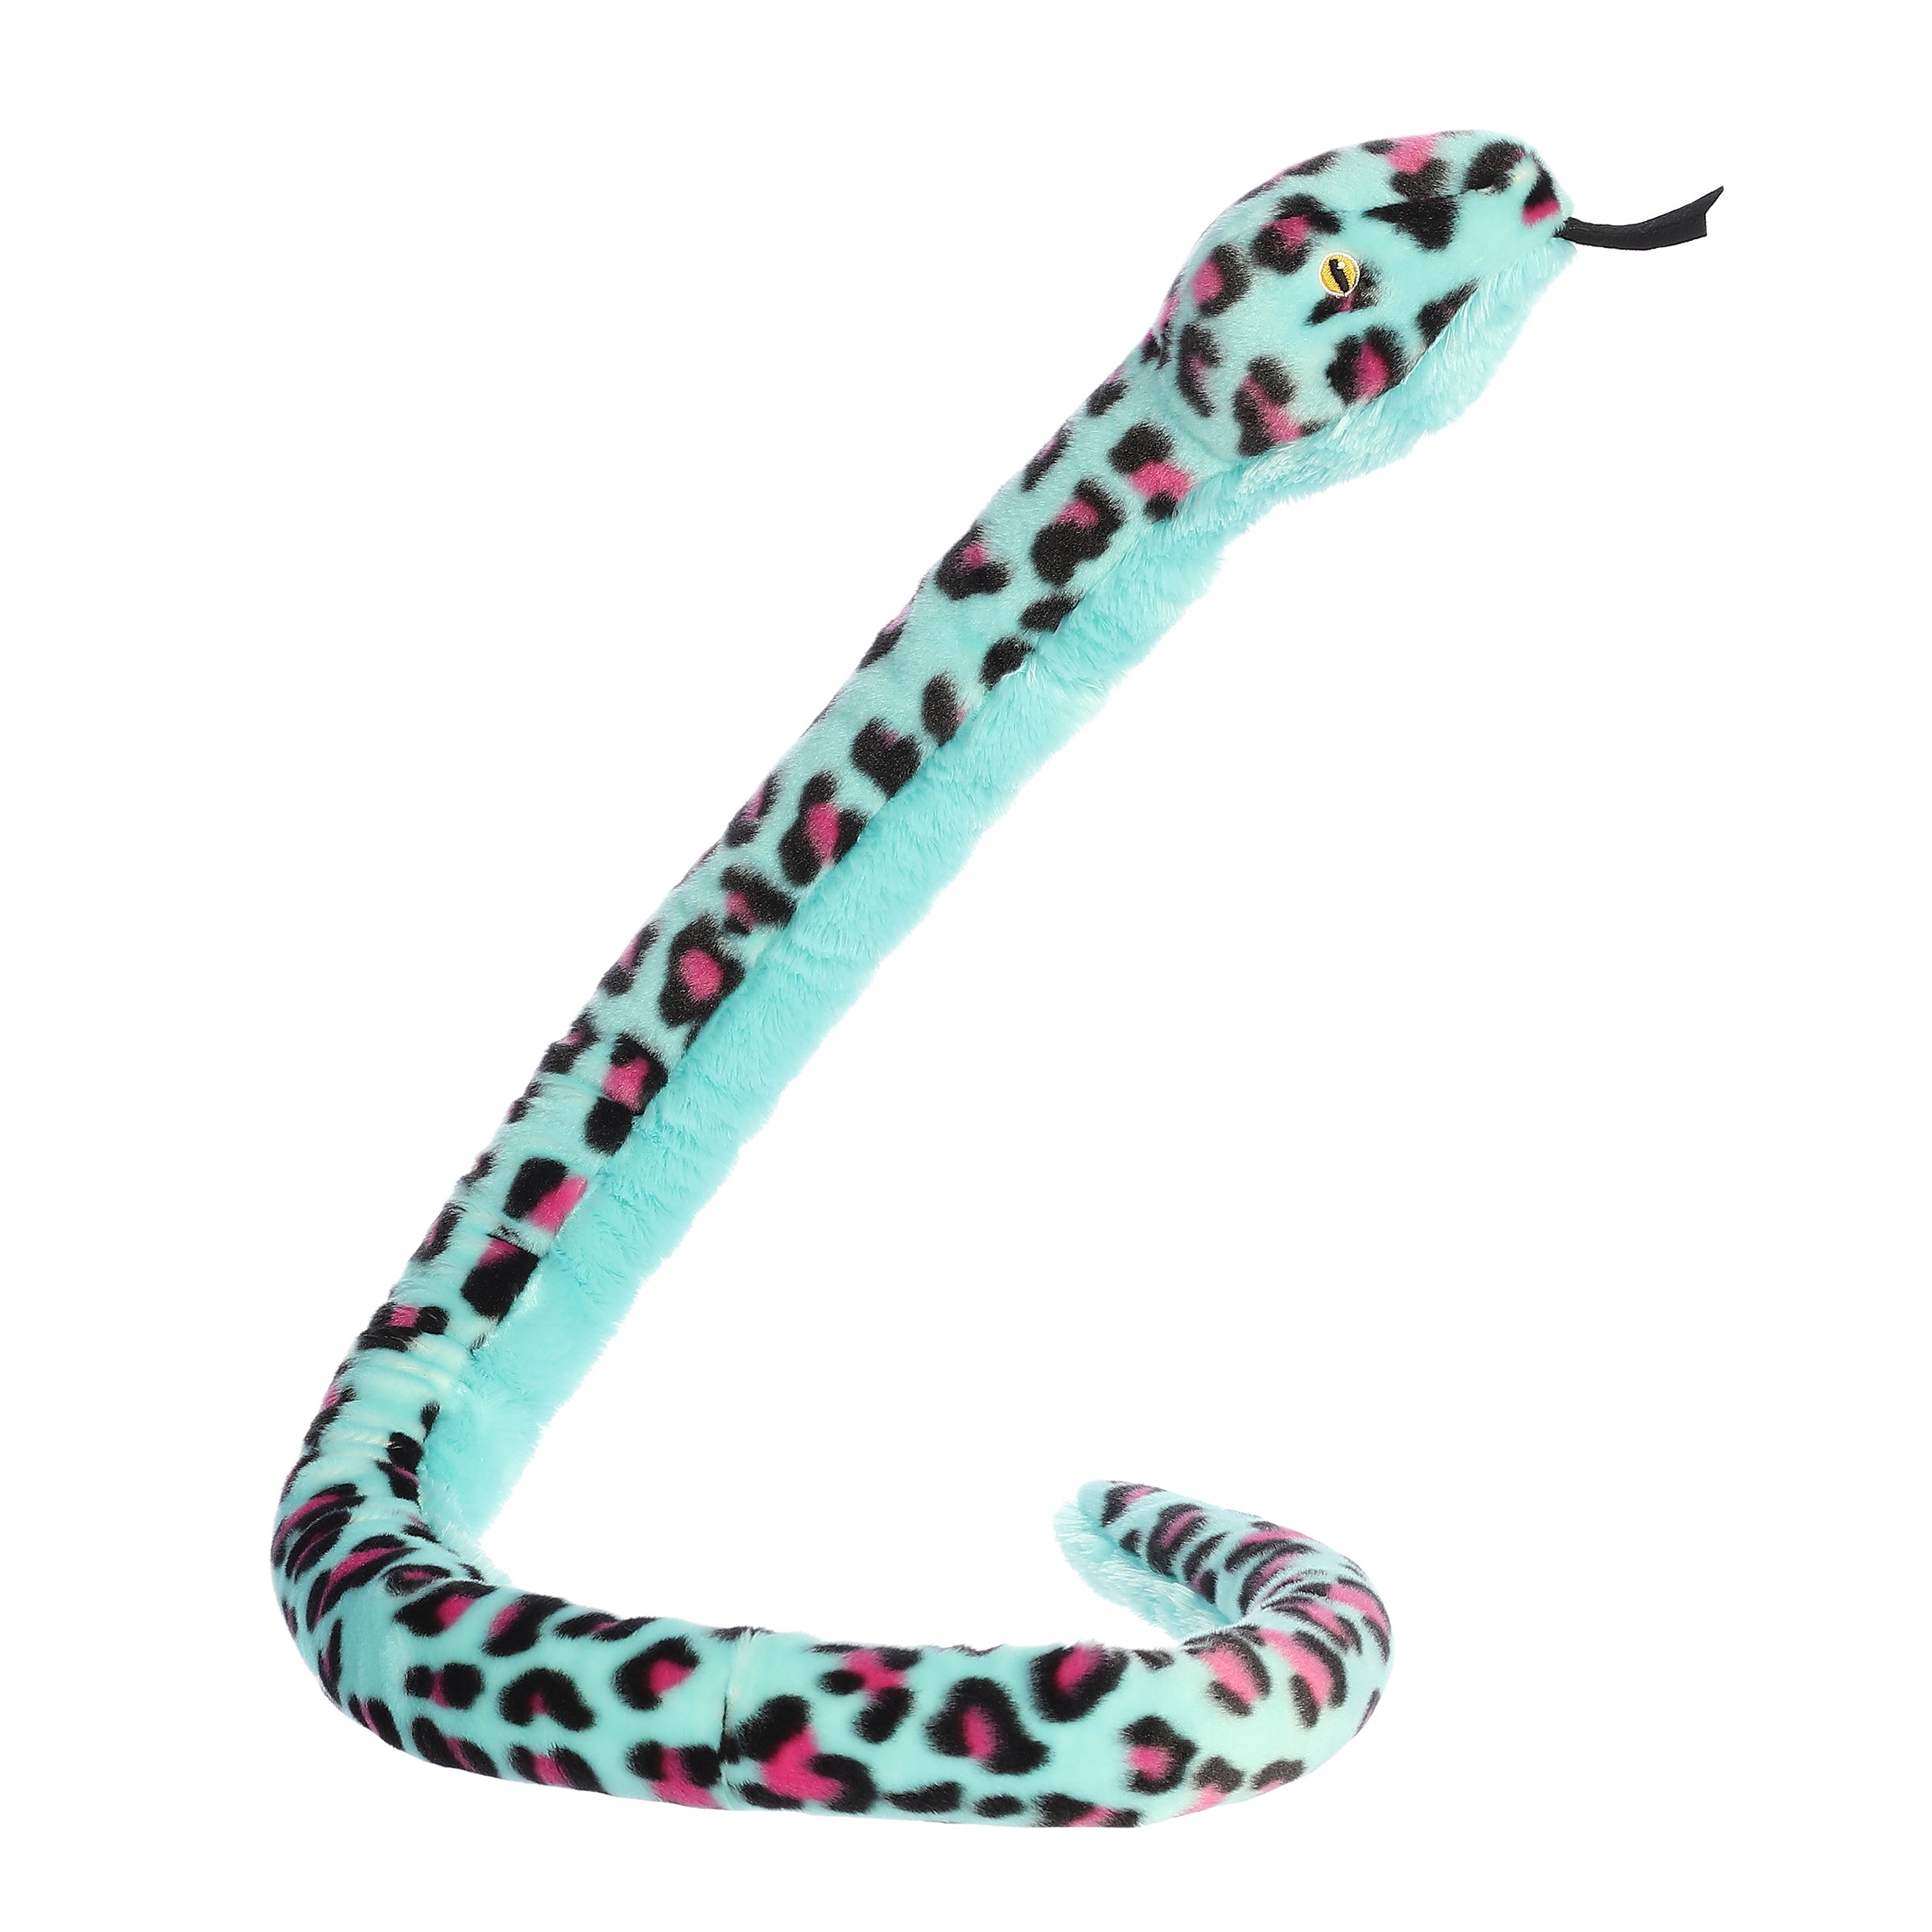 A long colorful snake stuffed animal plush that has a light blue body with black and purple spots